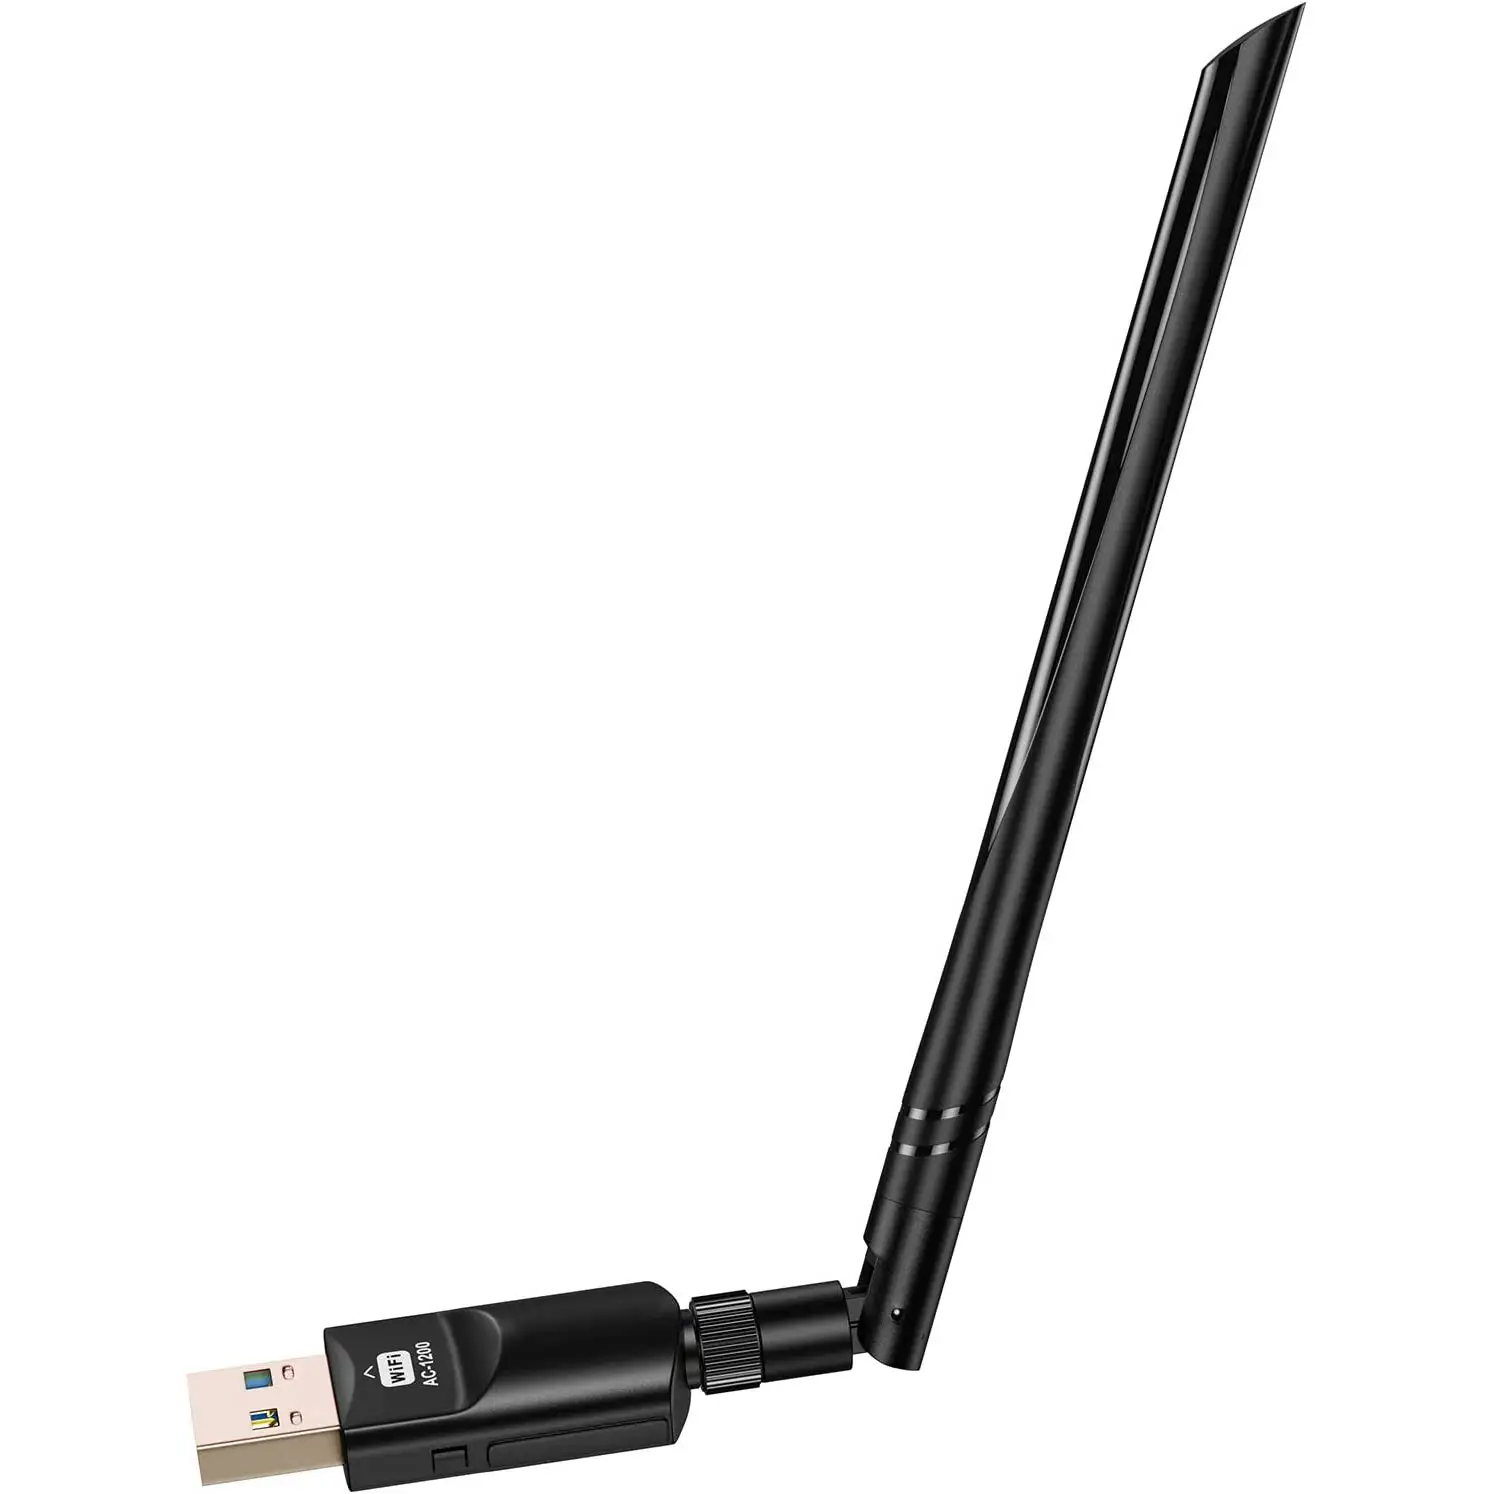 3.0 WiFi USB for PC 1200 Mbps Dongle 802.11 ac Wireless Network Adapter